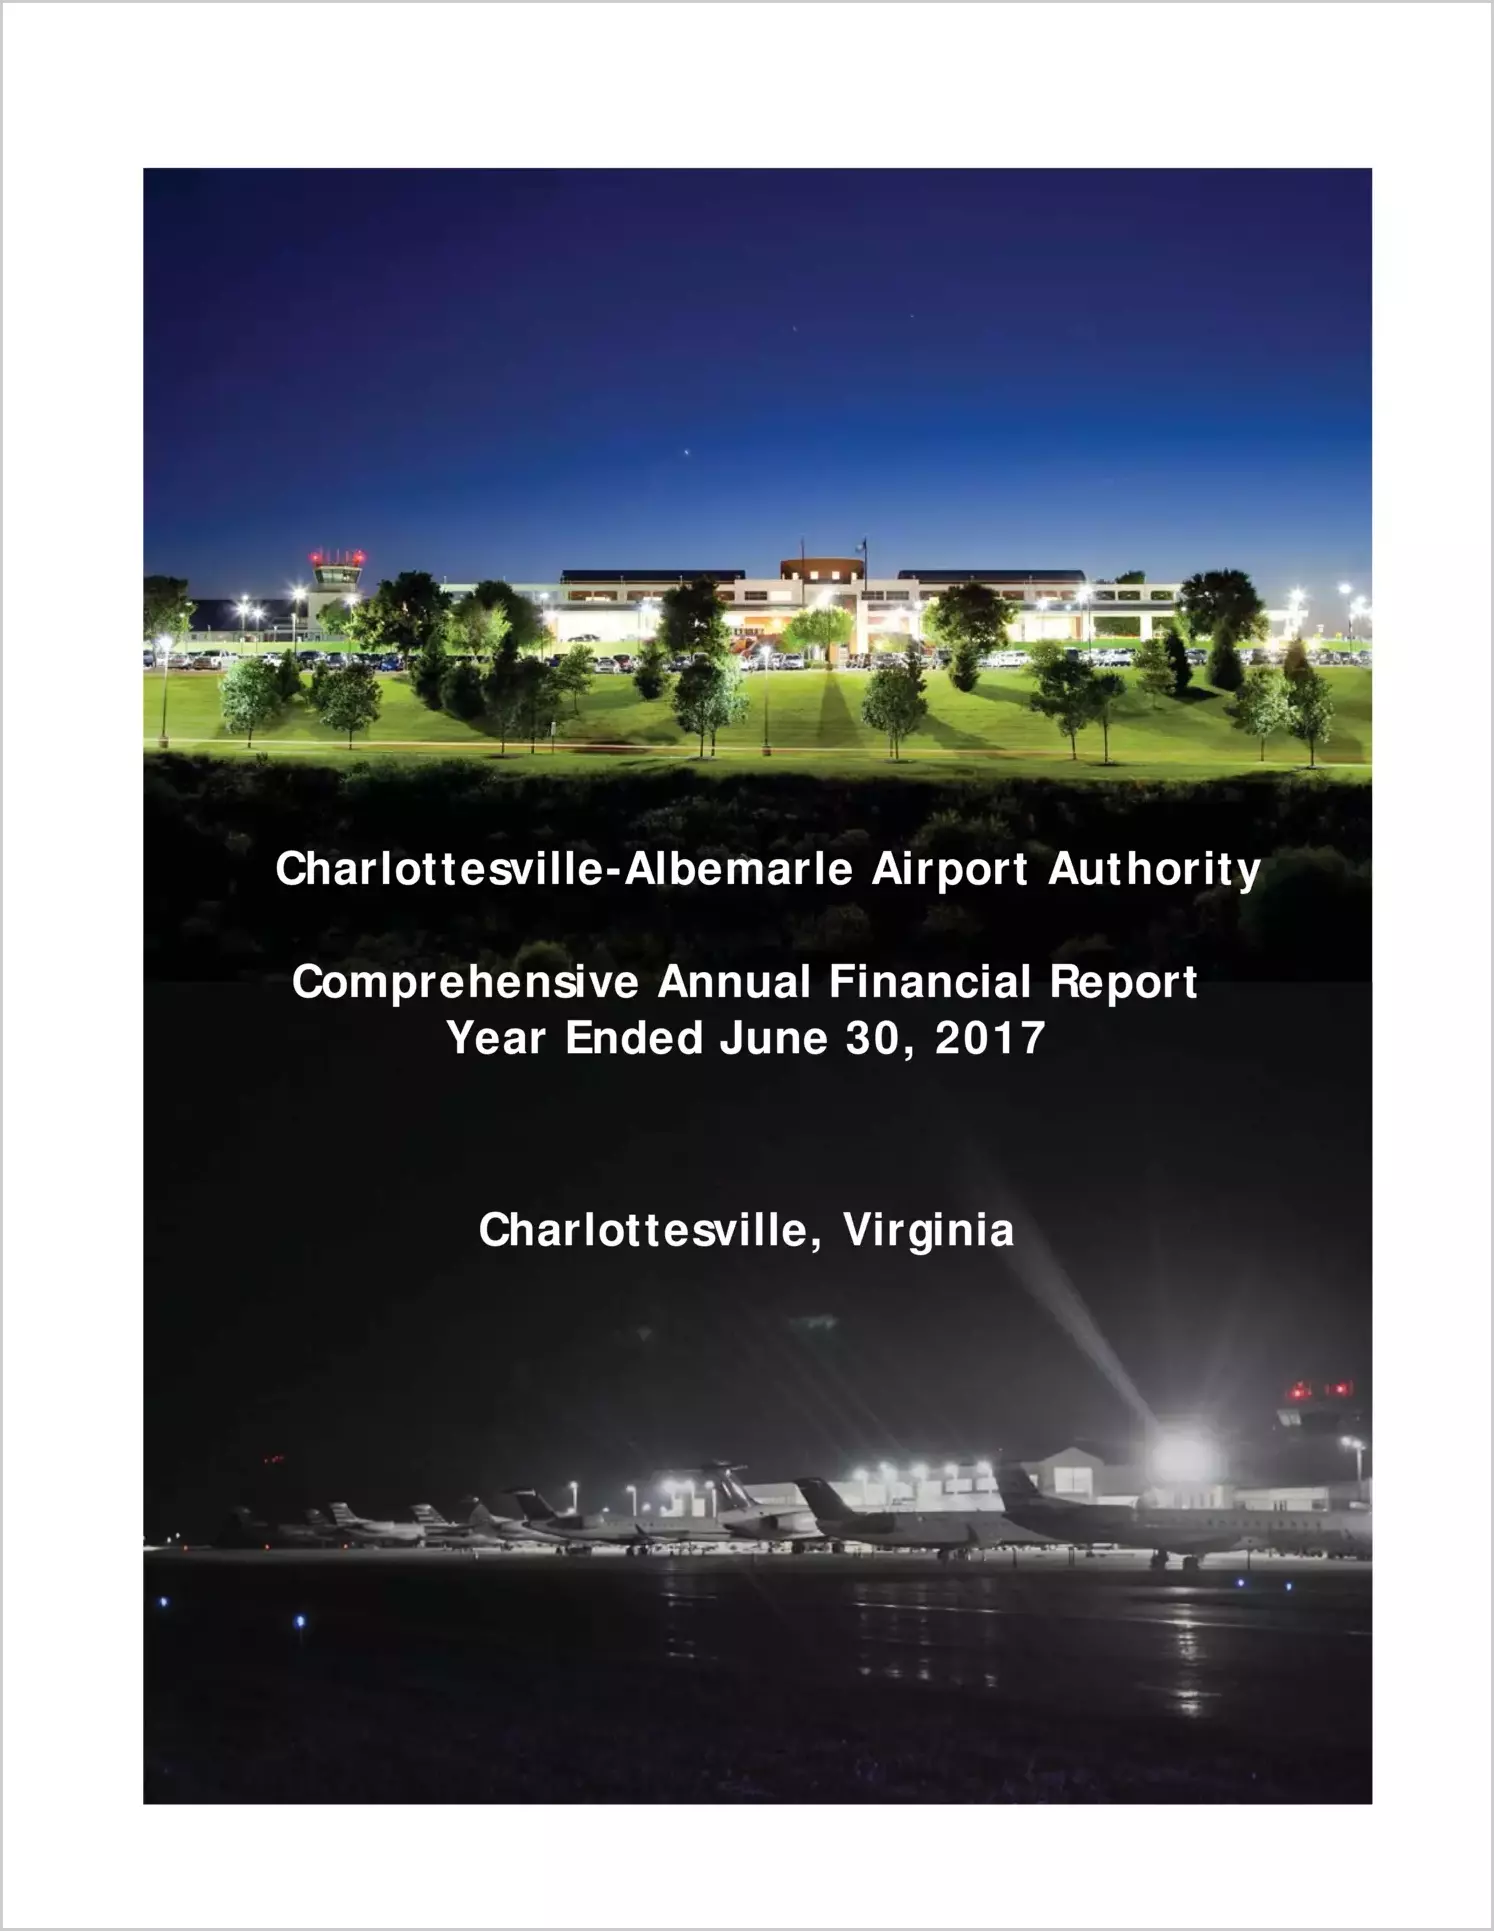 2017 ABC/Other Annual Financial Report  for Charlottesville-Albemarle Airport Authority